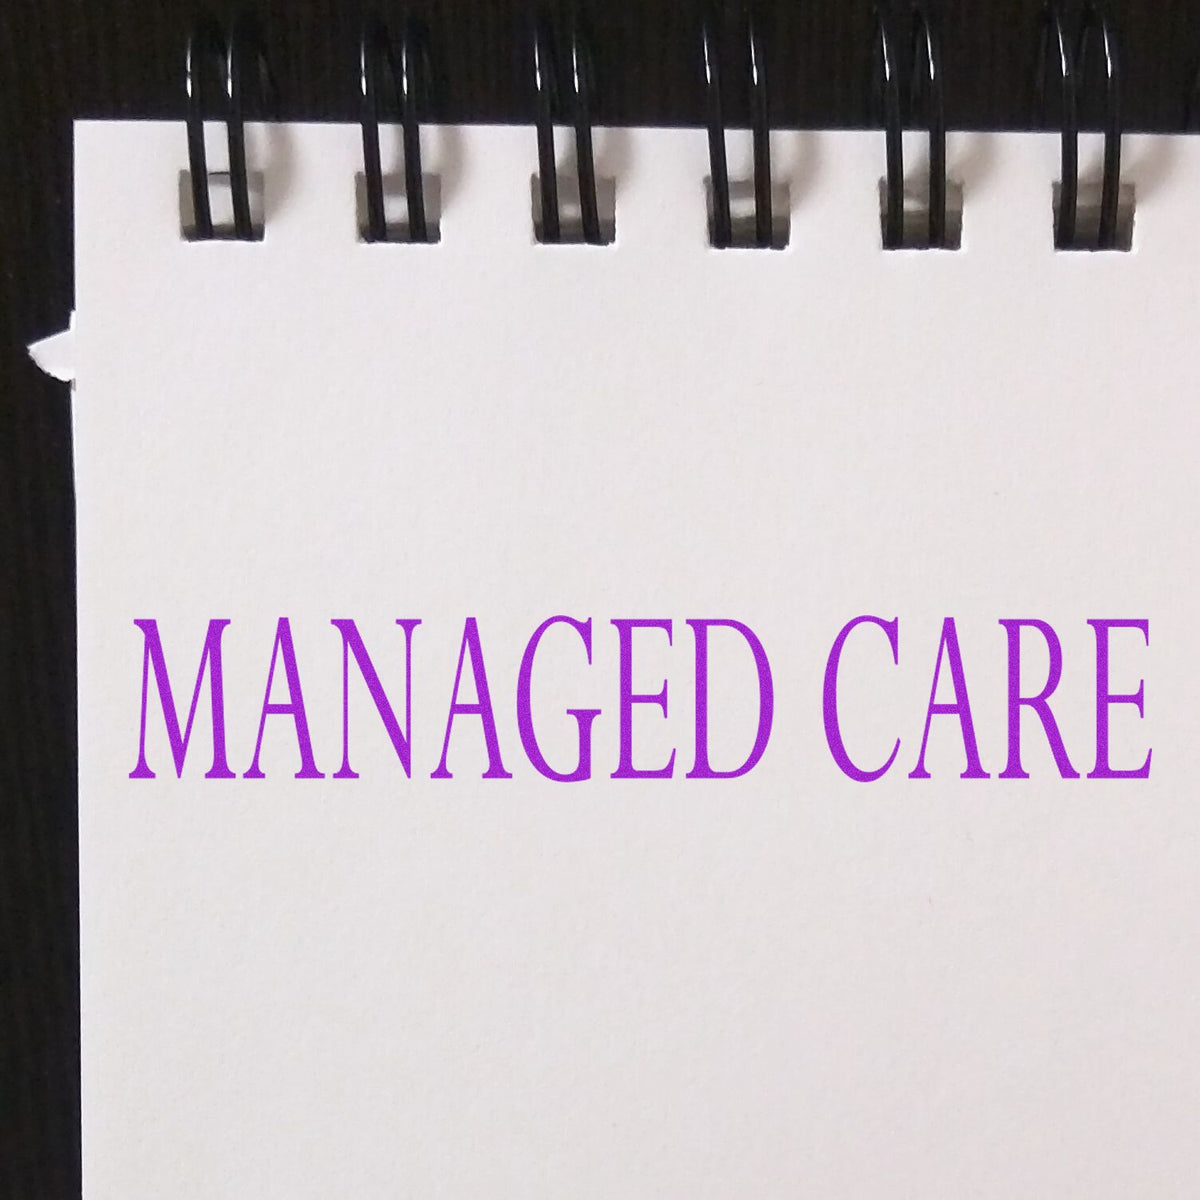 Managed Care Rubber Stamp In Use